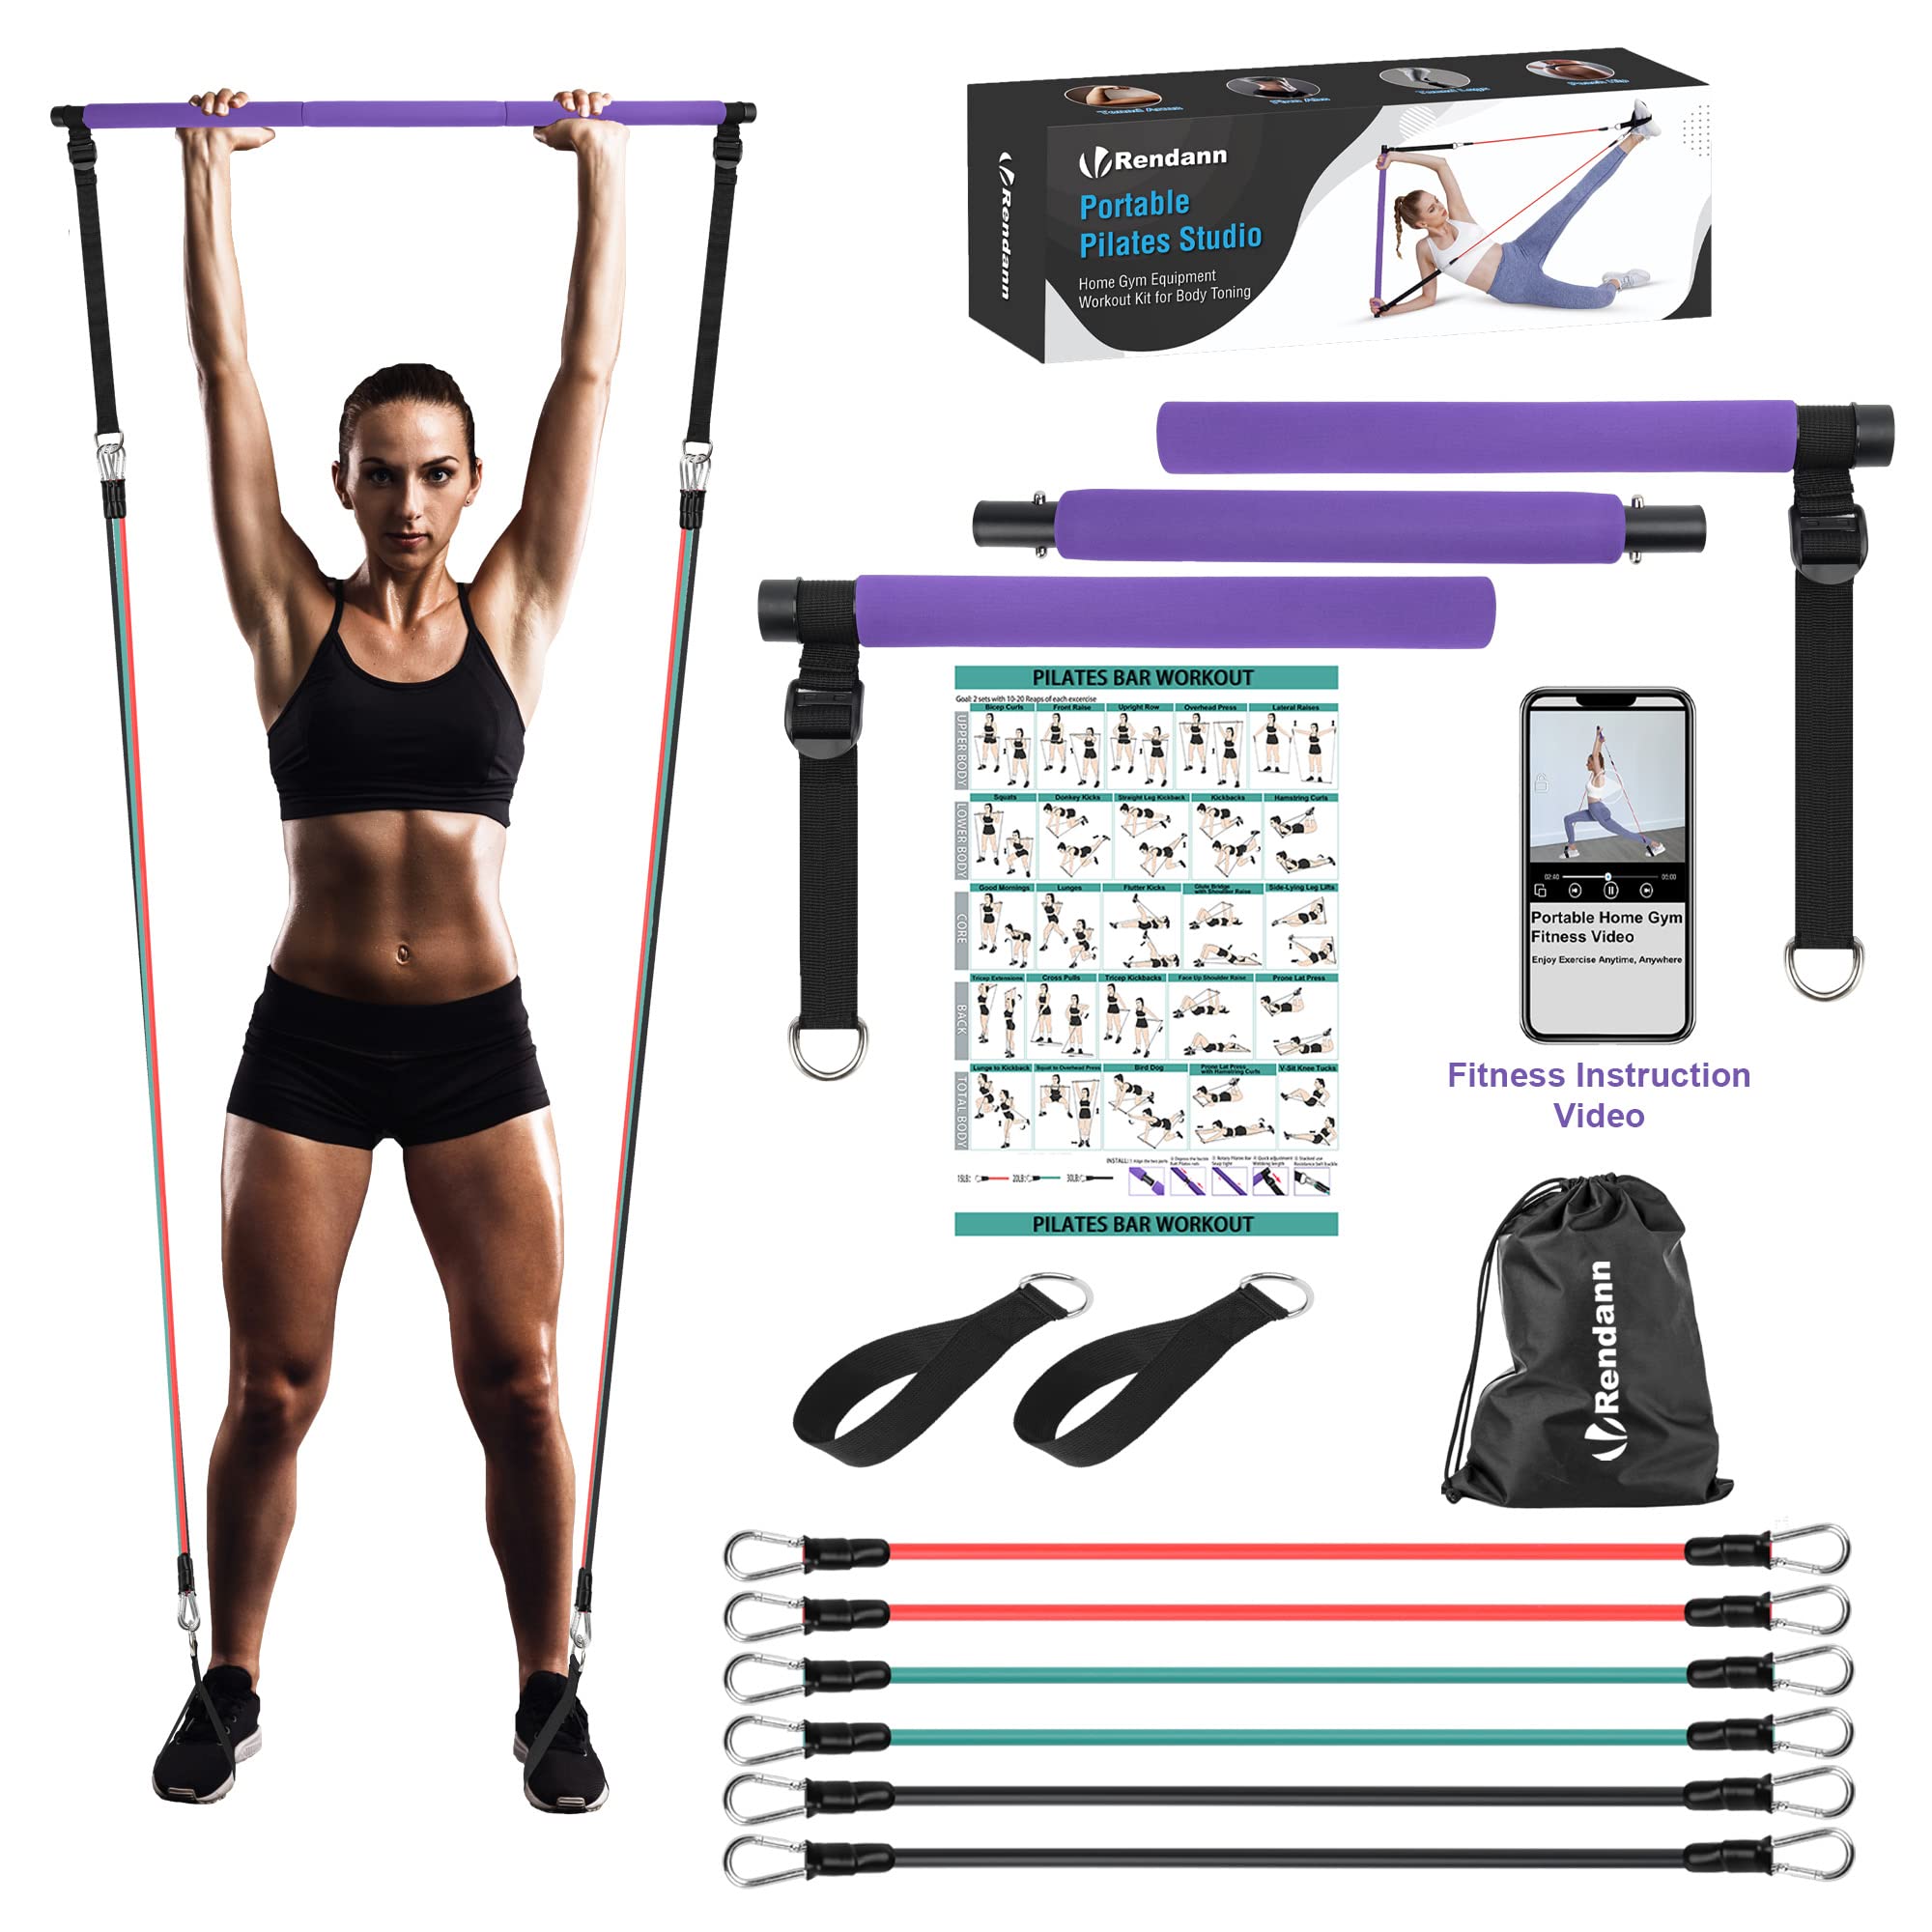 Portable Pilates Bar Exercise Kit-Stackable 3 Pairs of Resistance Bands  (15, 20, 30LB) - Home Gym Equipment for Men and Women, Workout Kit for Body  Toning,with Fitness Video(Purple).